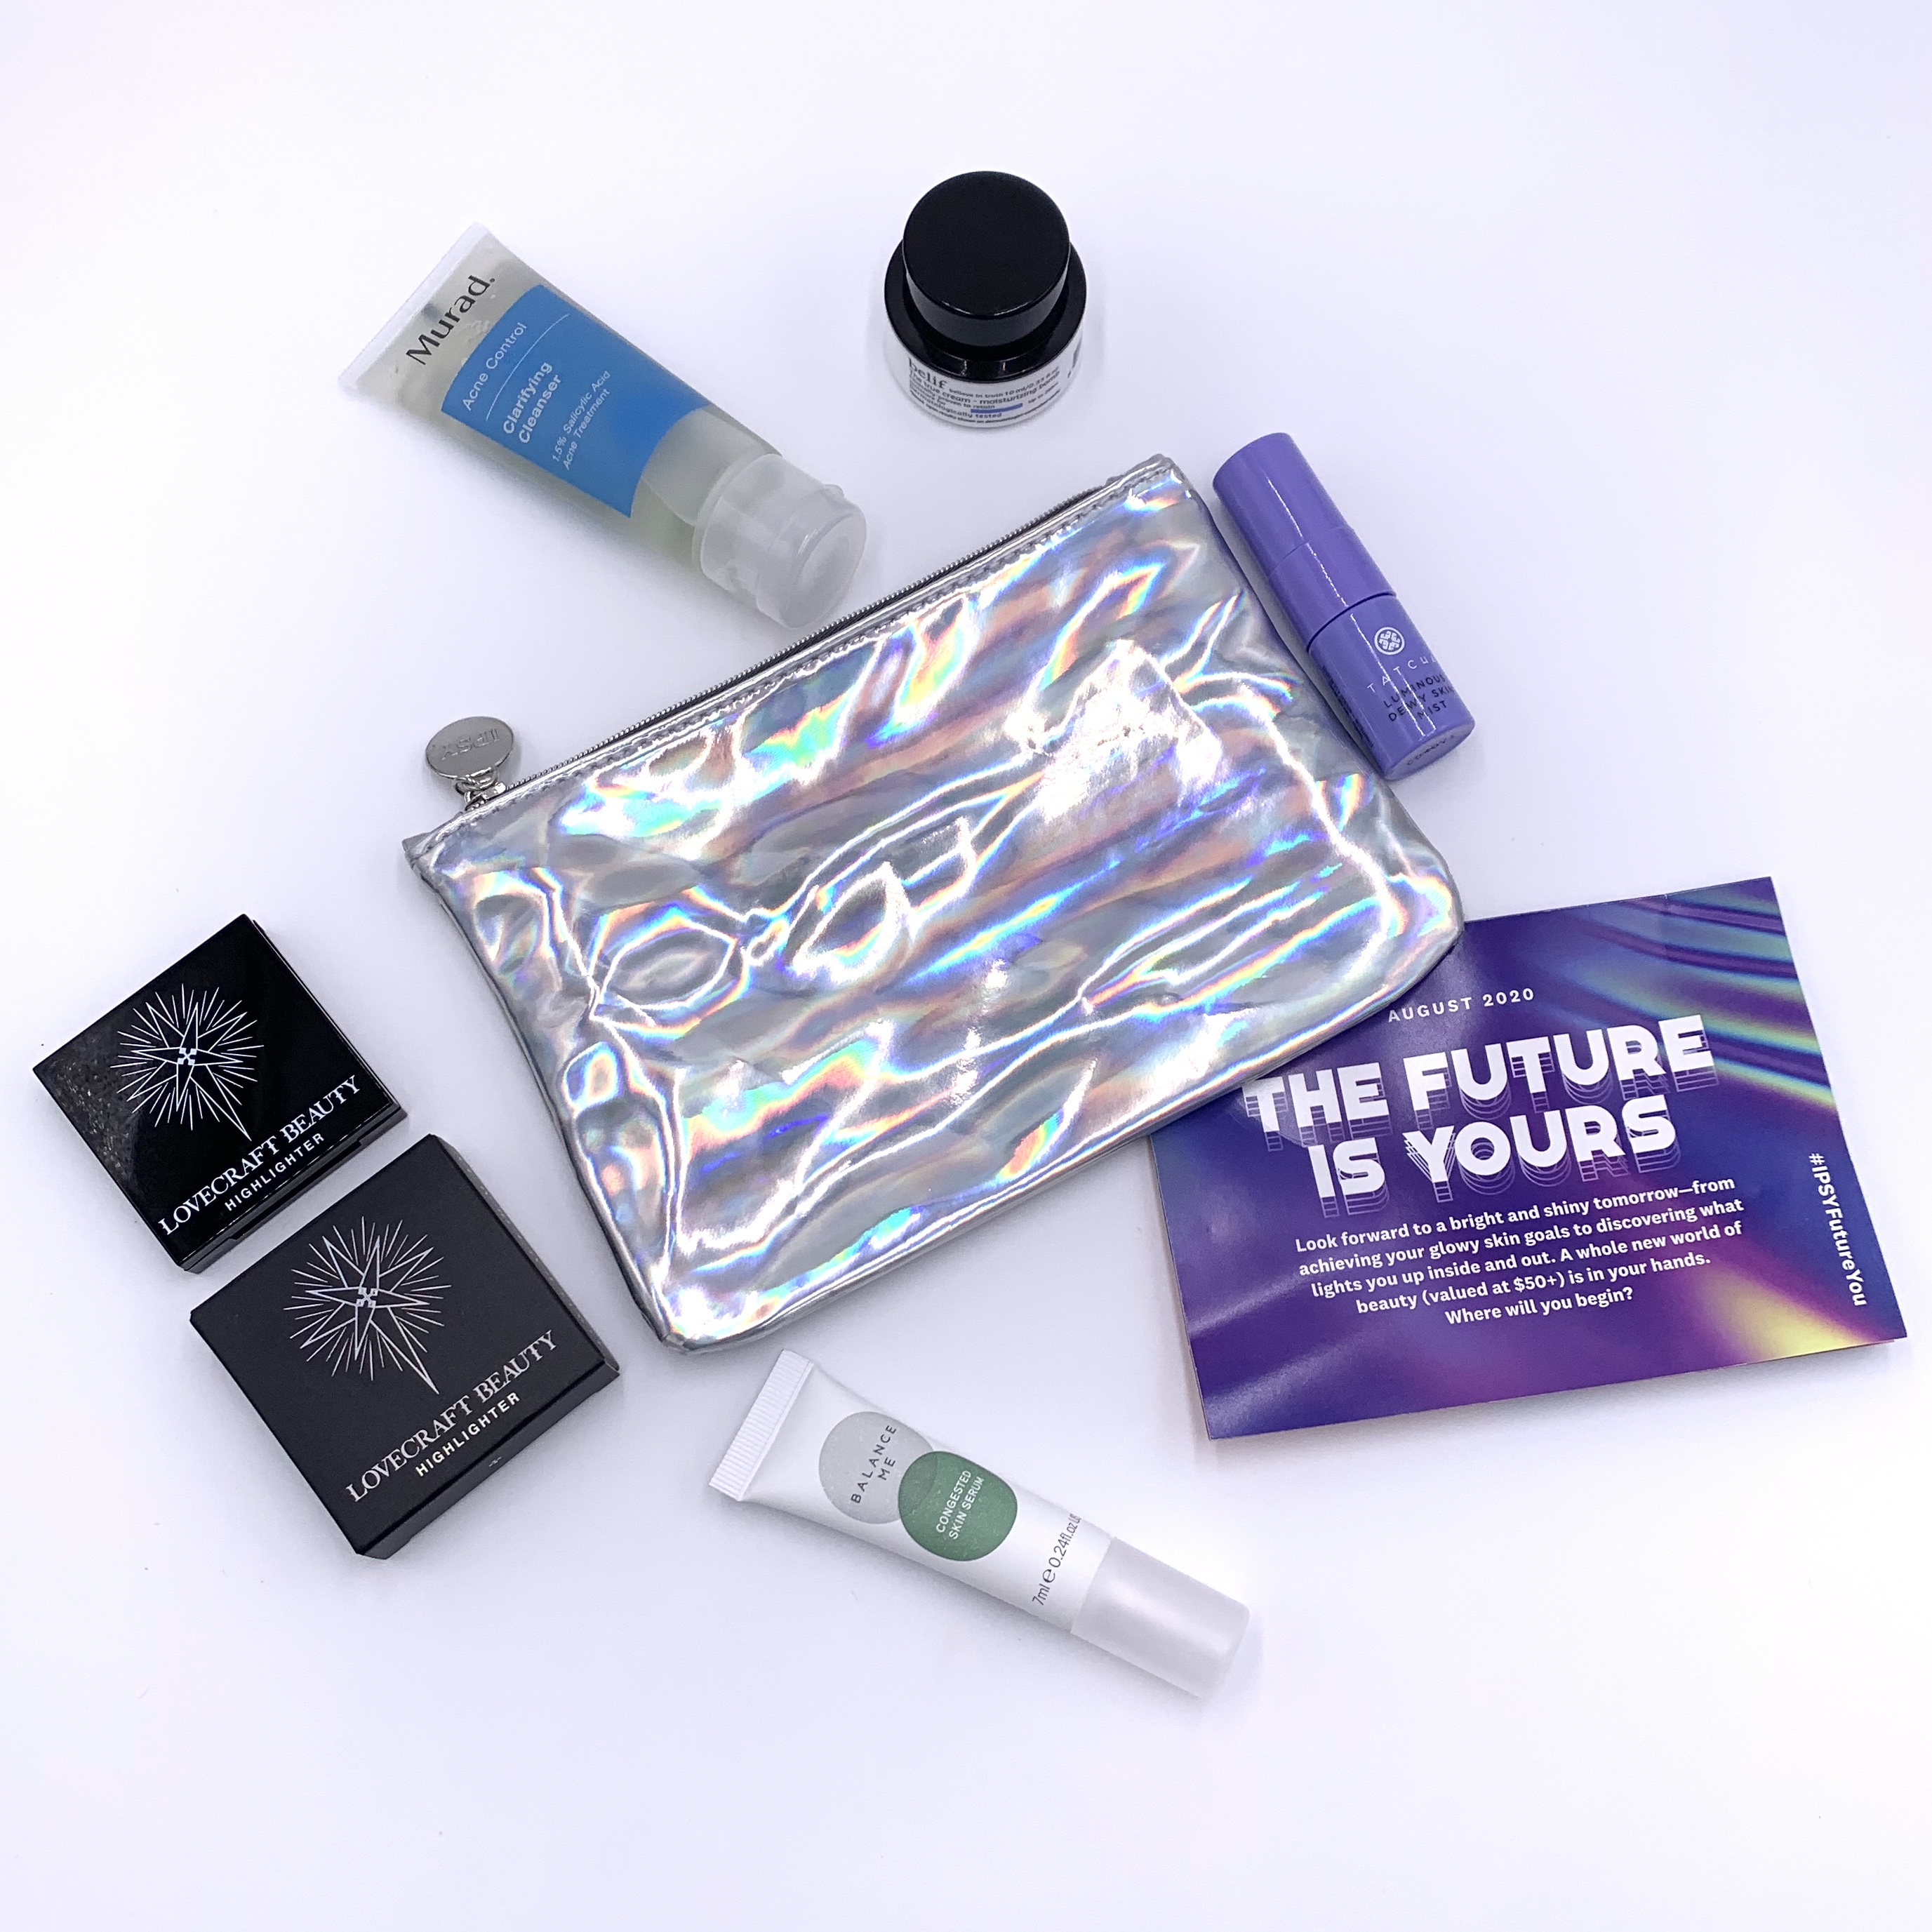 Full Contents for Ipsy Glam Bag August 2020